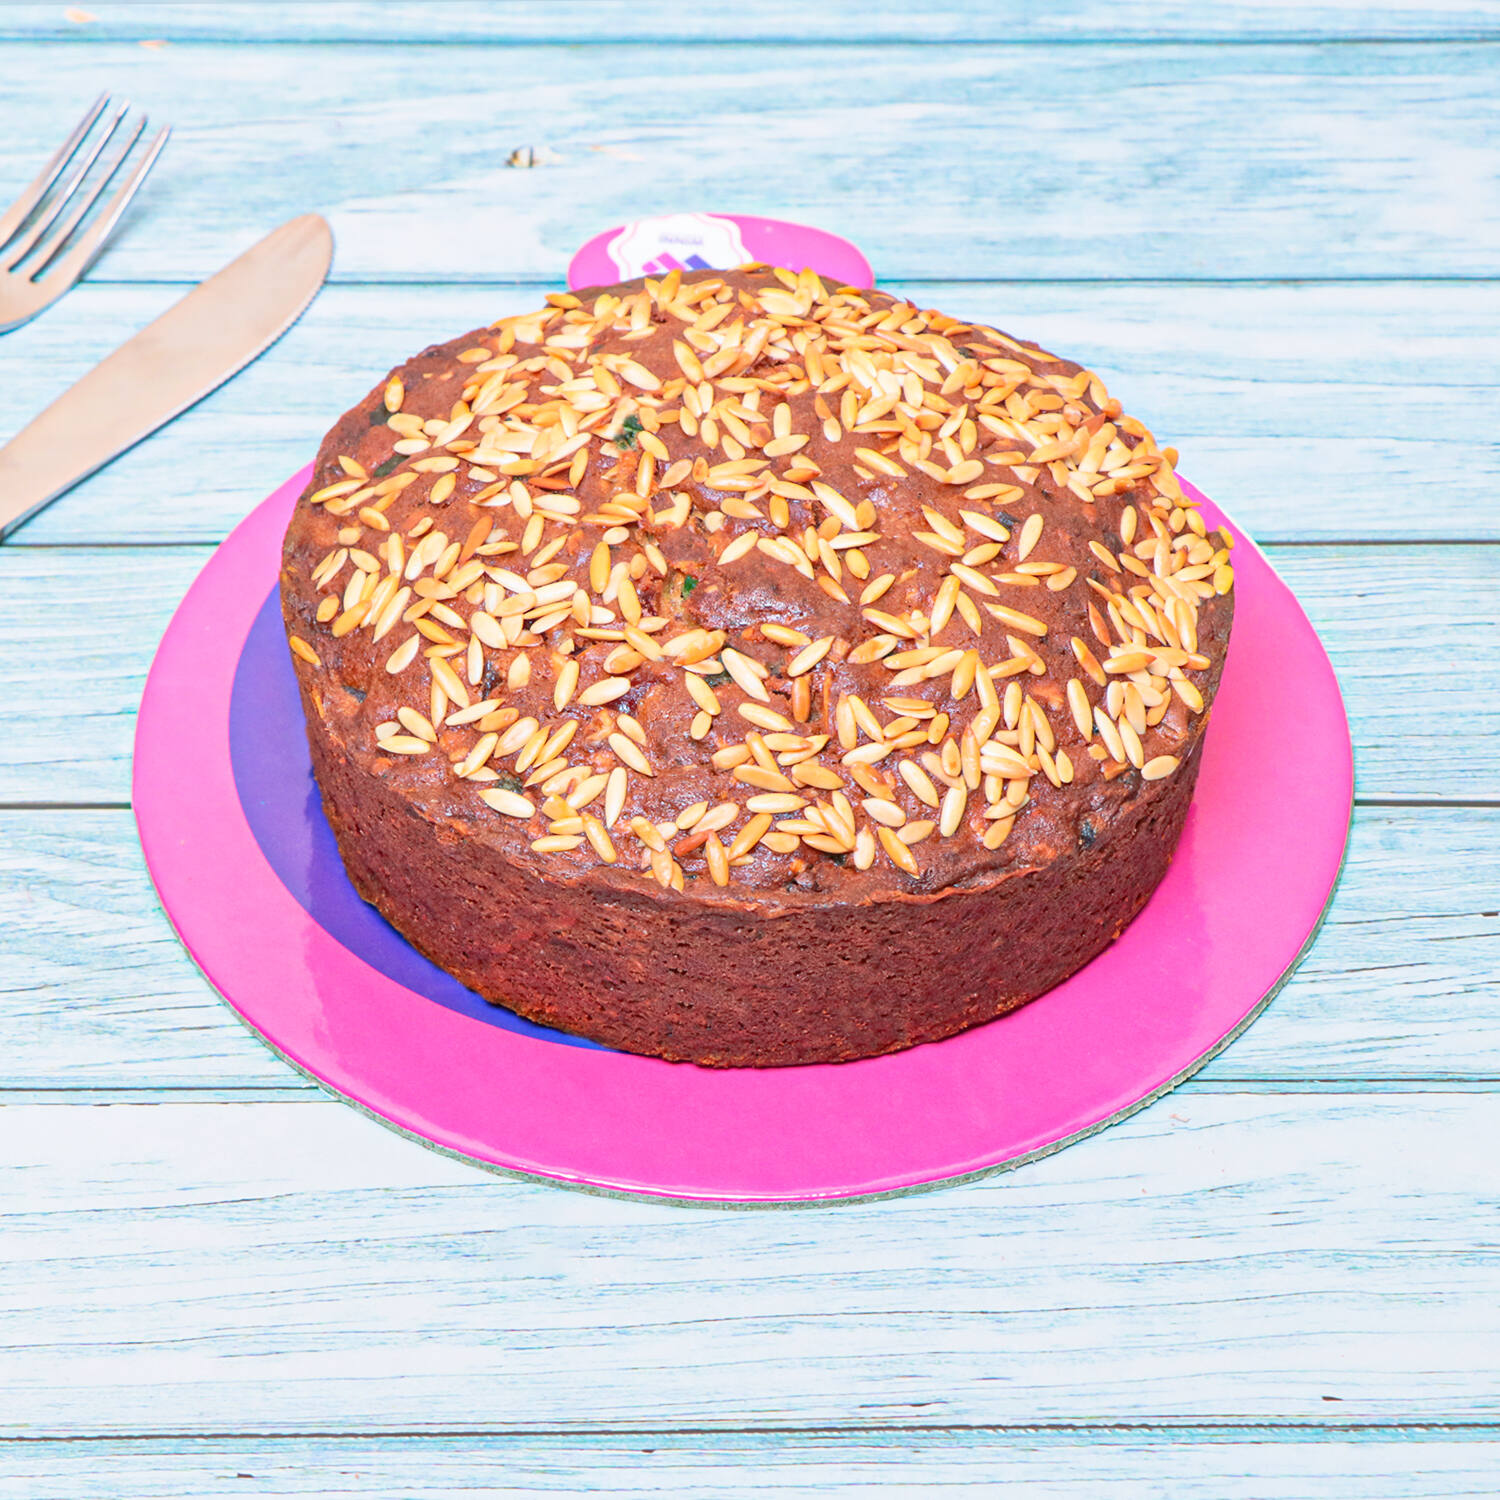 Almonds Cake Recipe Without oven - Dry Almond cake | @FoodfusionPk - YouTube